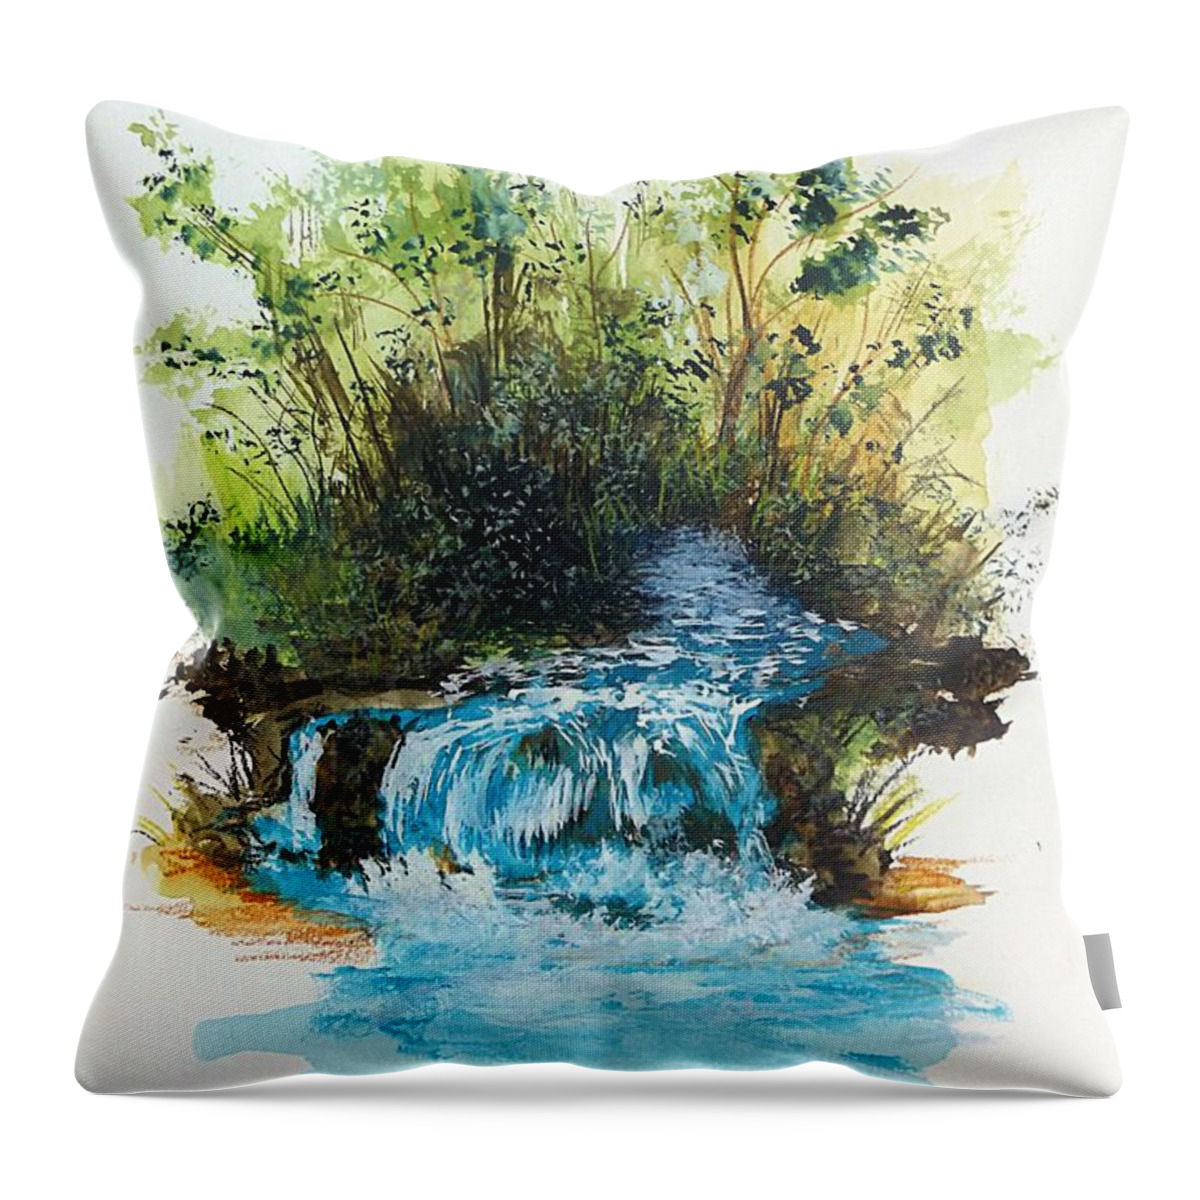 Waterfall Throw Pillow featuring the painting Waterfall by David Neace